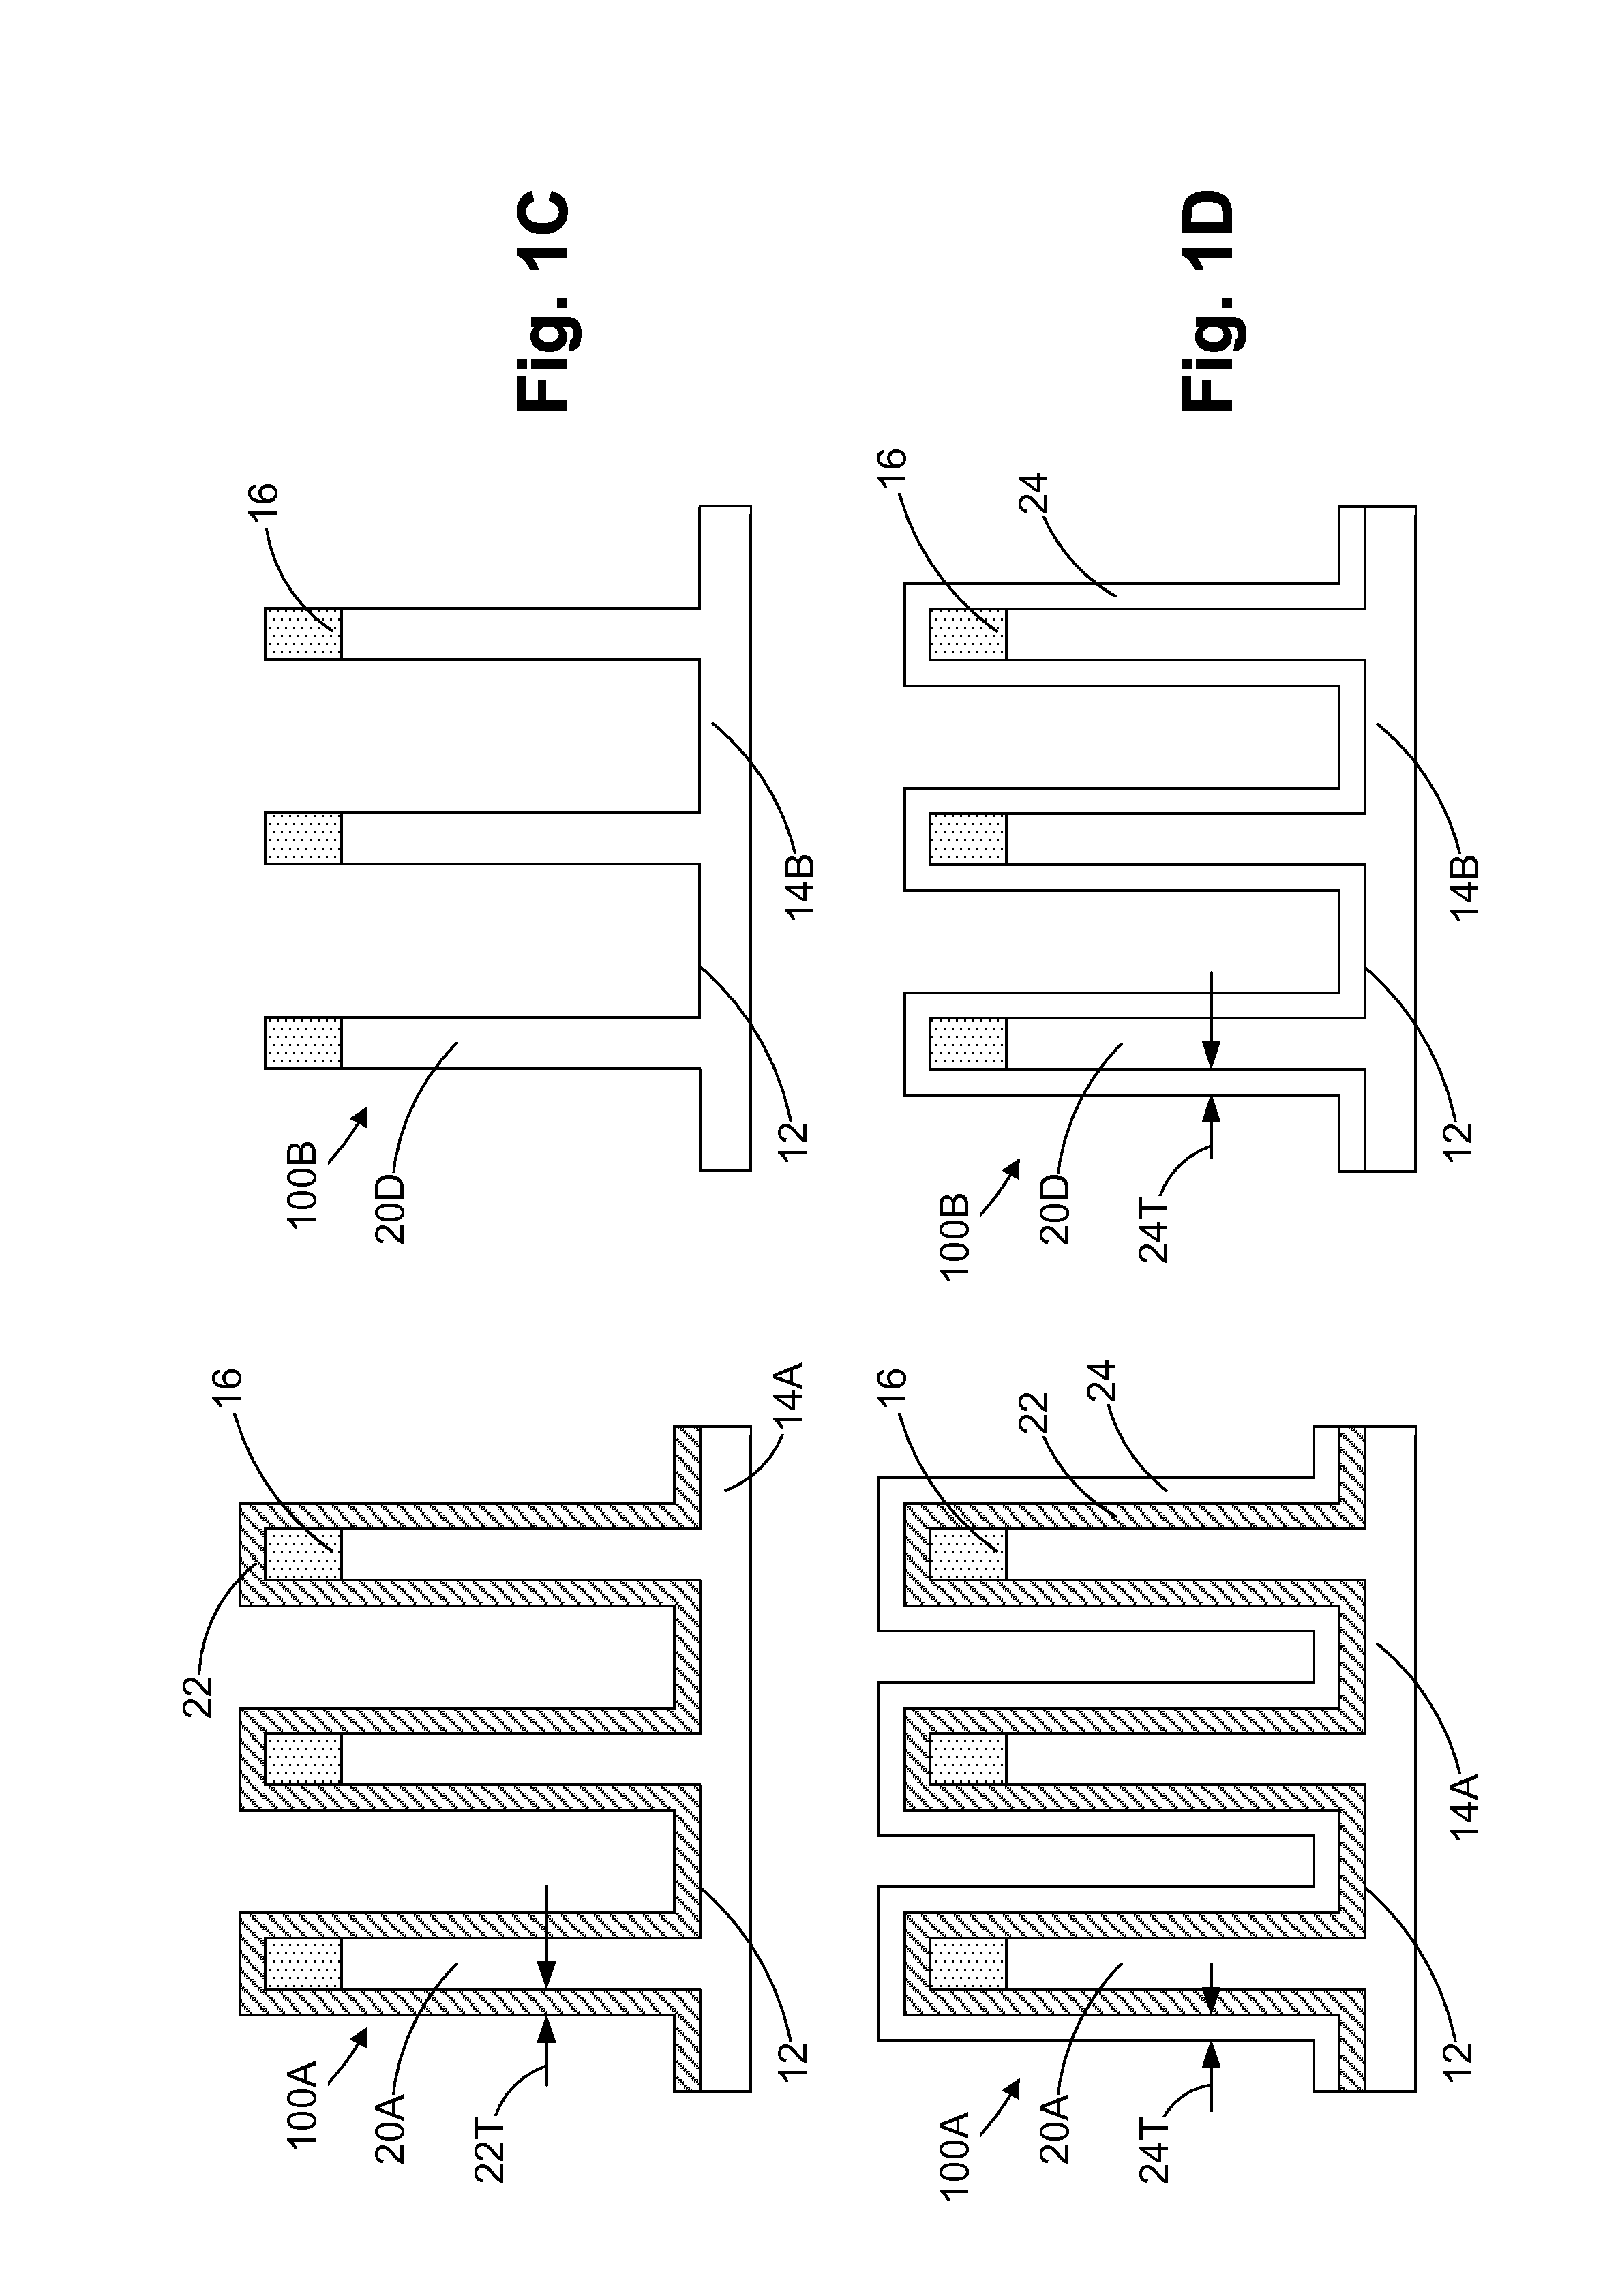 Methods of forming different FinFET devices having different fin heights and an integrated circuit product containing such devices